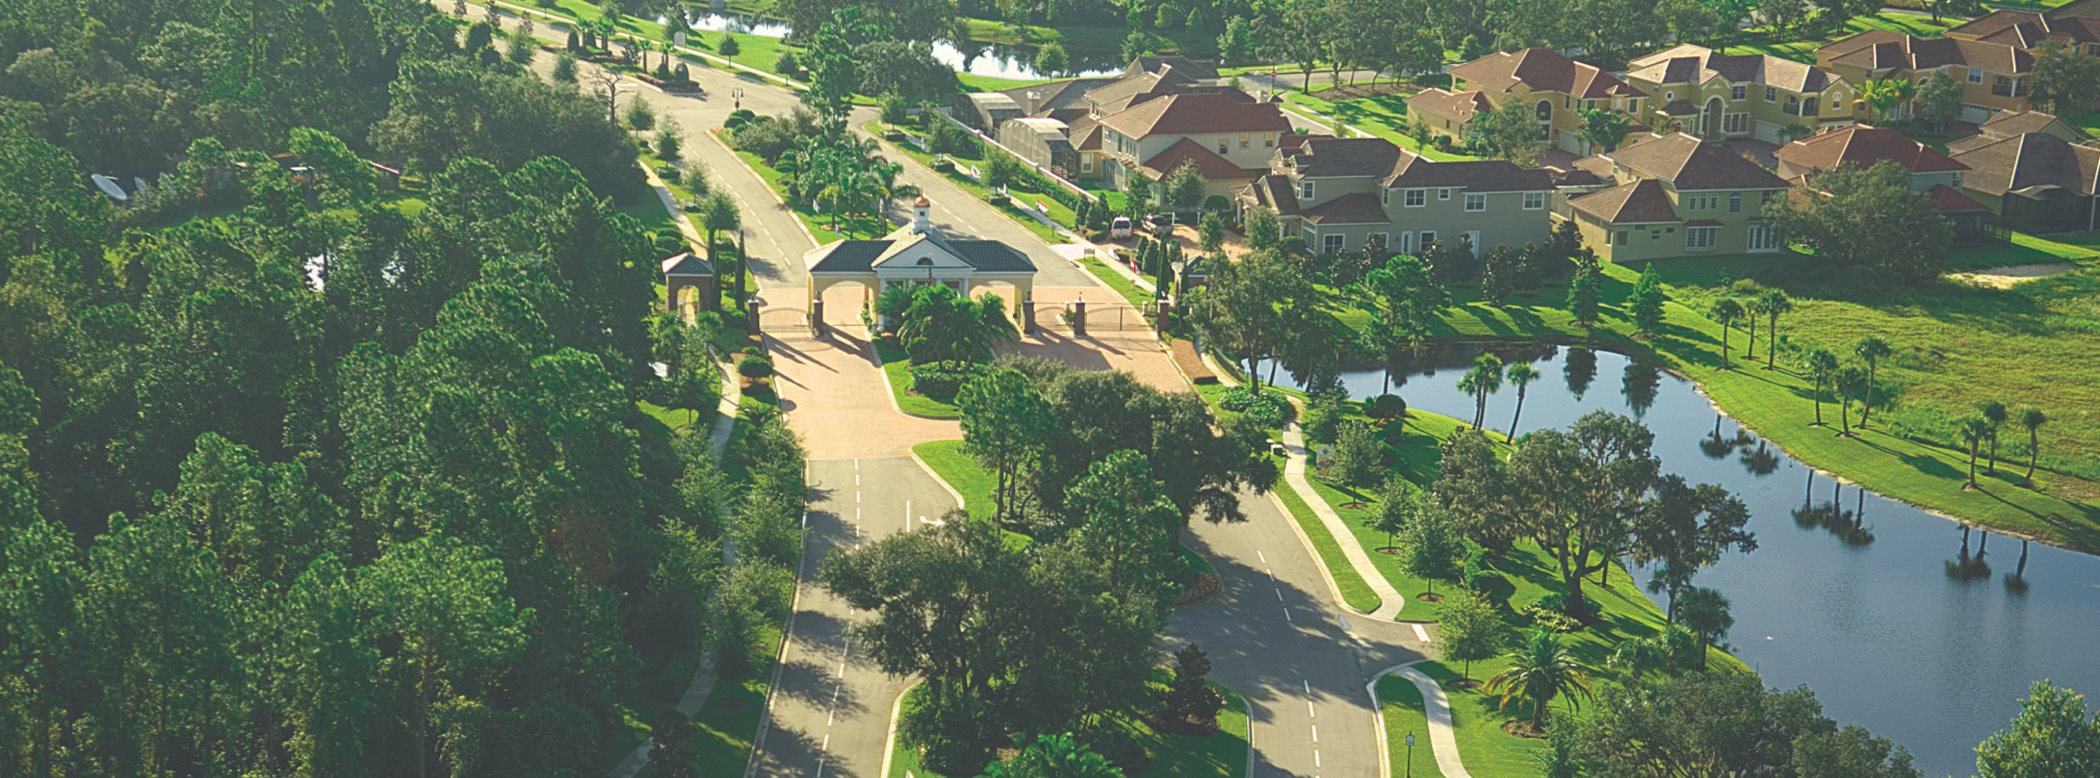 Garden Hills Chateau Collection aerial streetscape